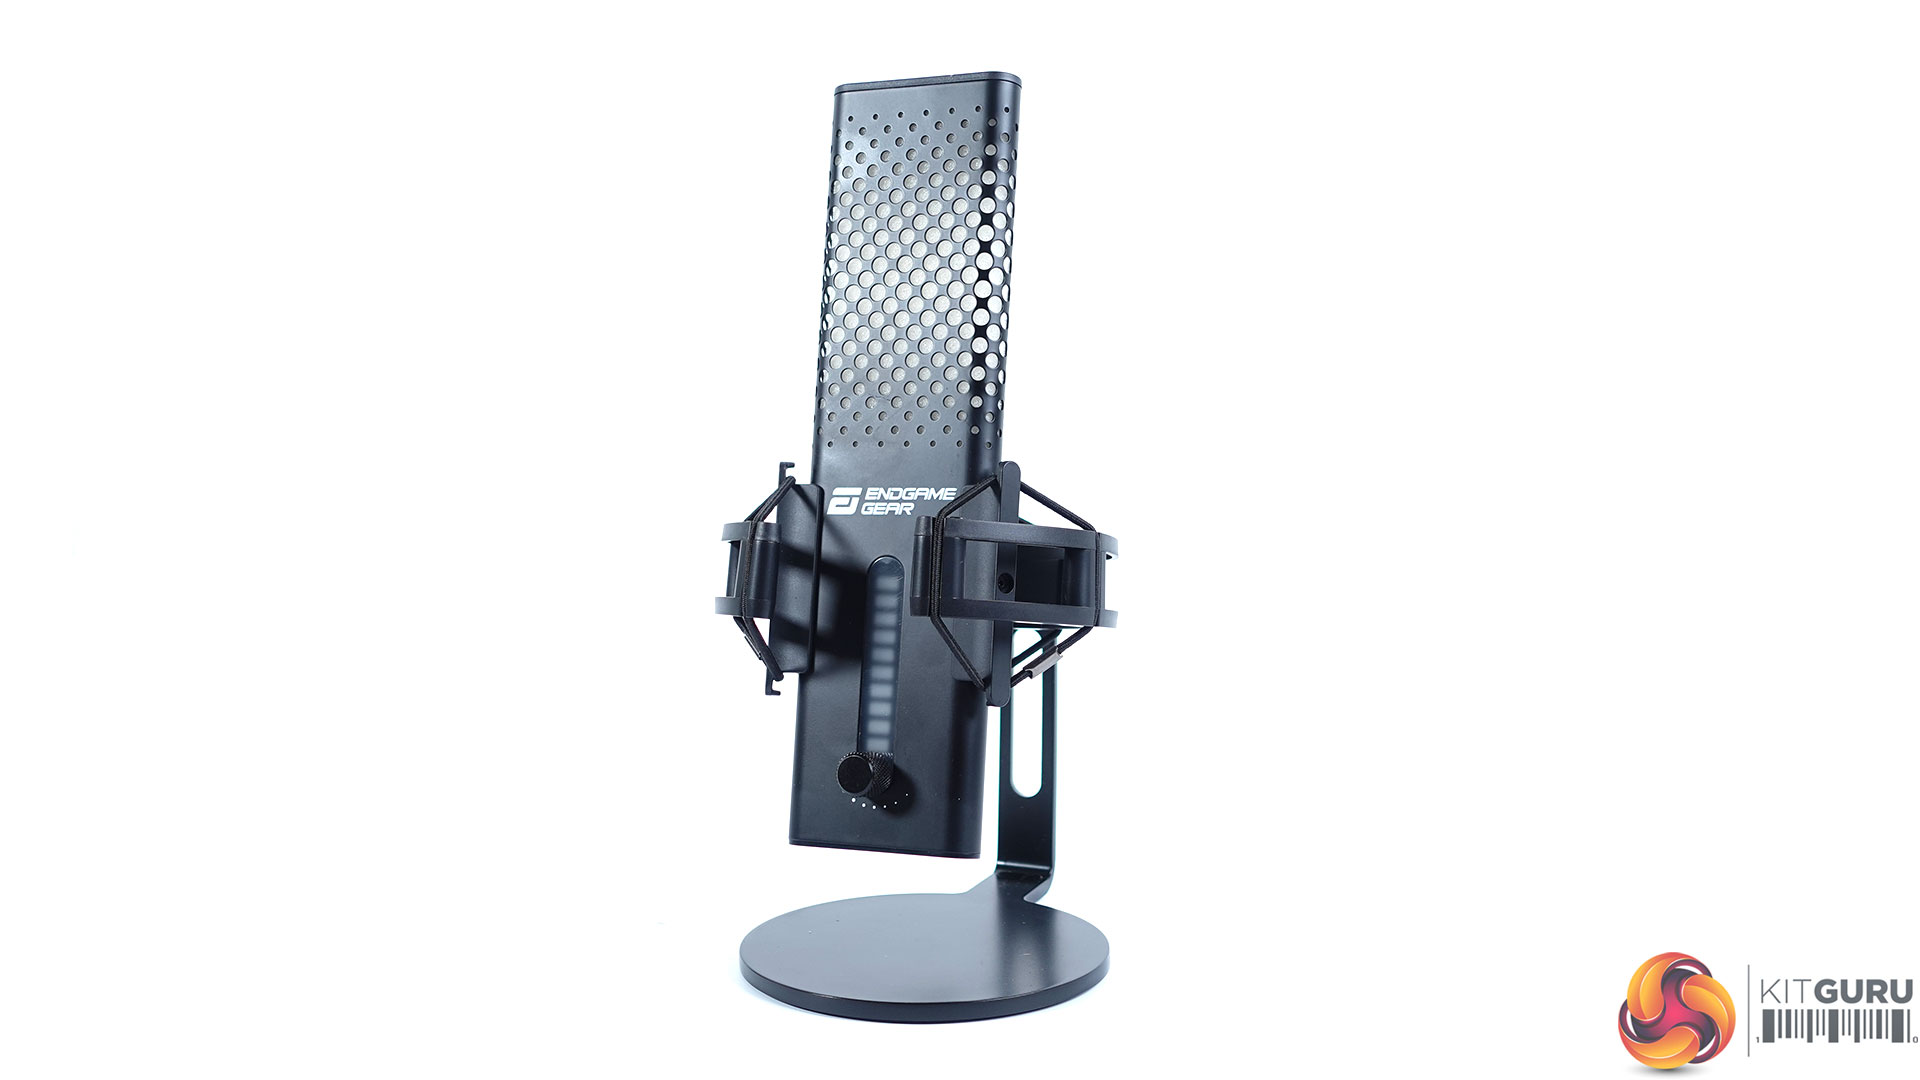 Endgame Gear XSTRM review: USB microphone with extraordinary look